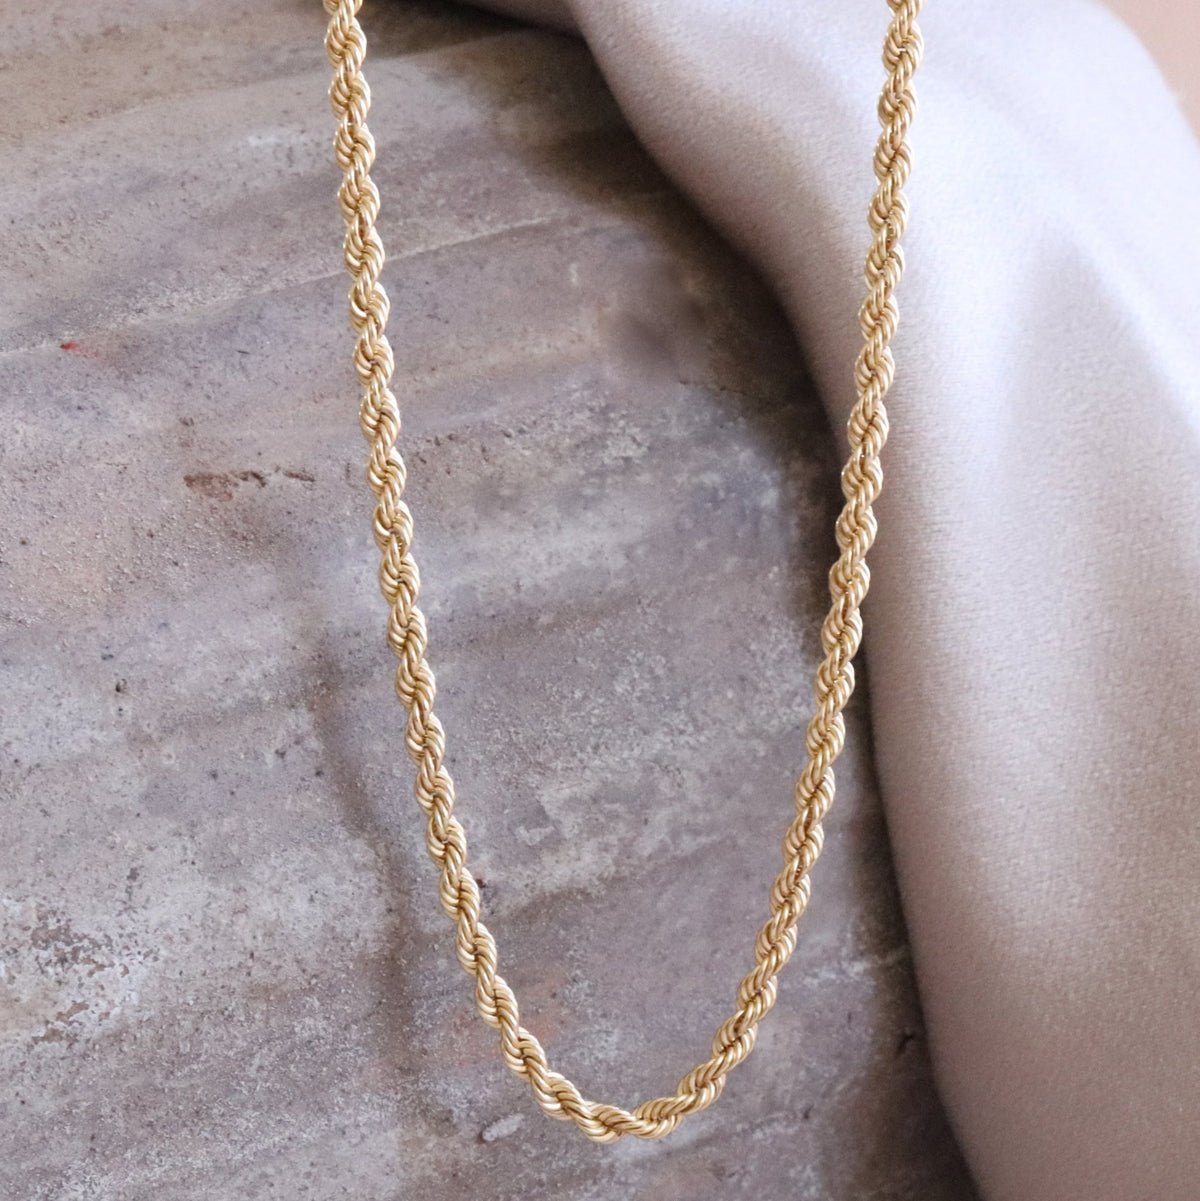 POISE TWISTED ROPE CHAIN 15-17&quot; NECKLACE GOLD - SO PRETTY CARA COTTER